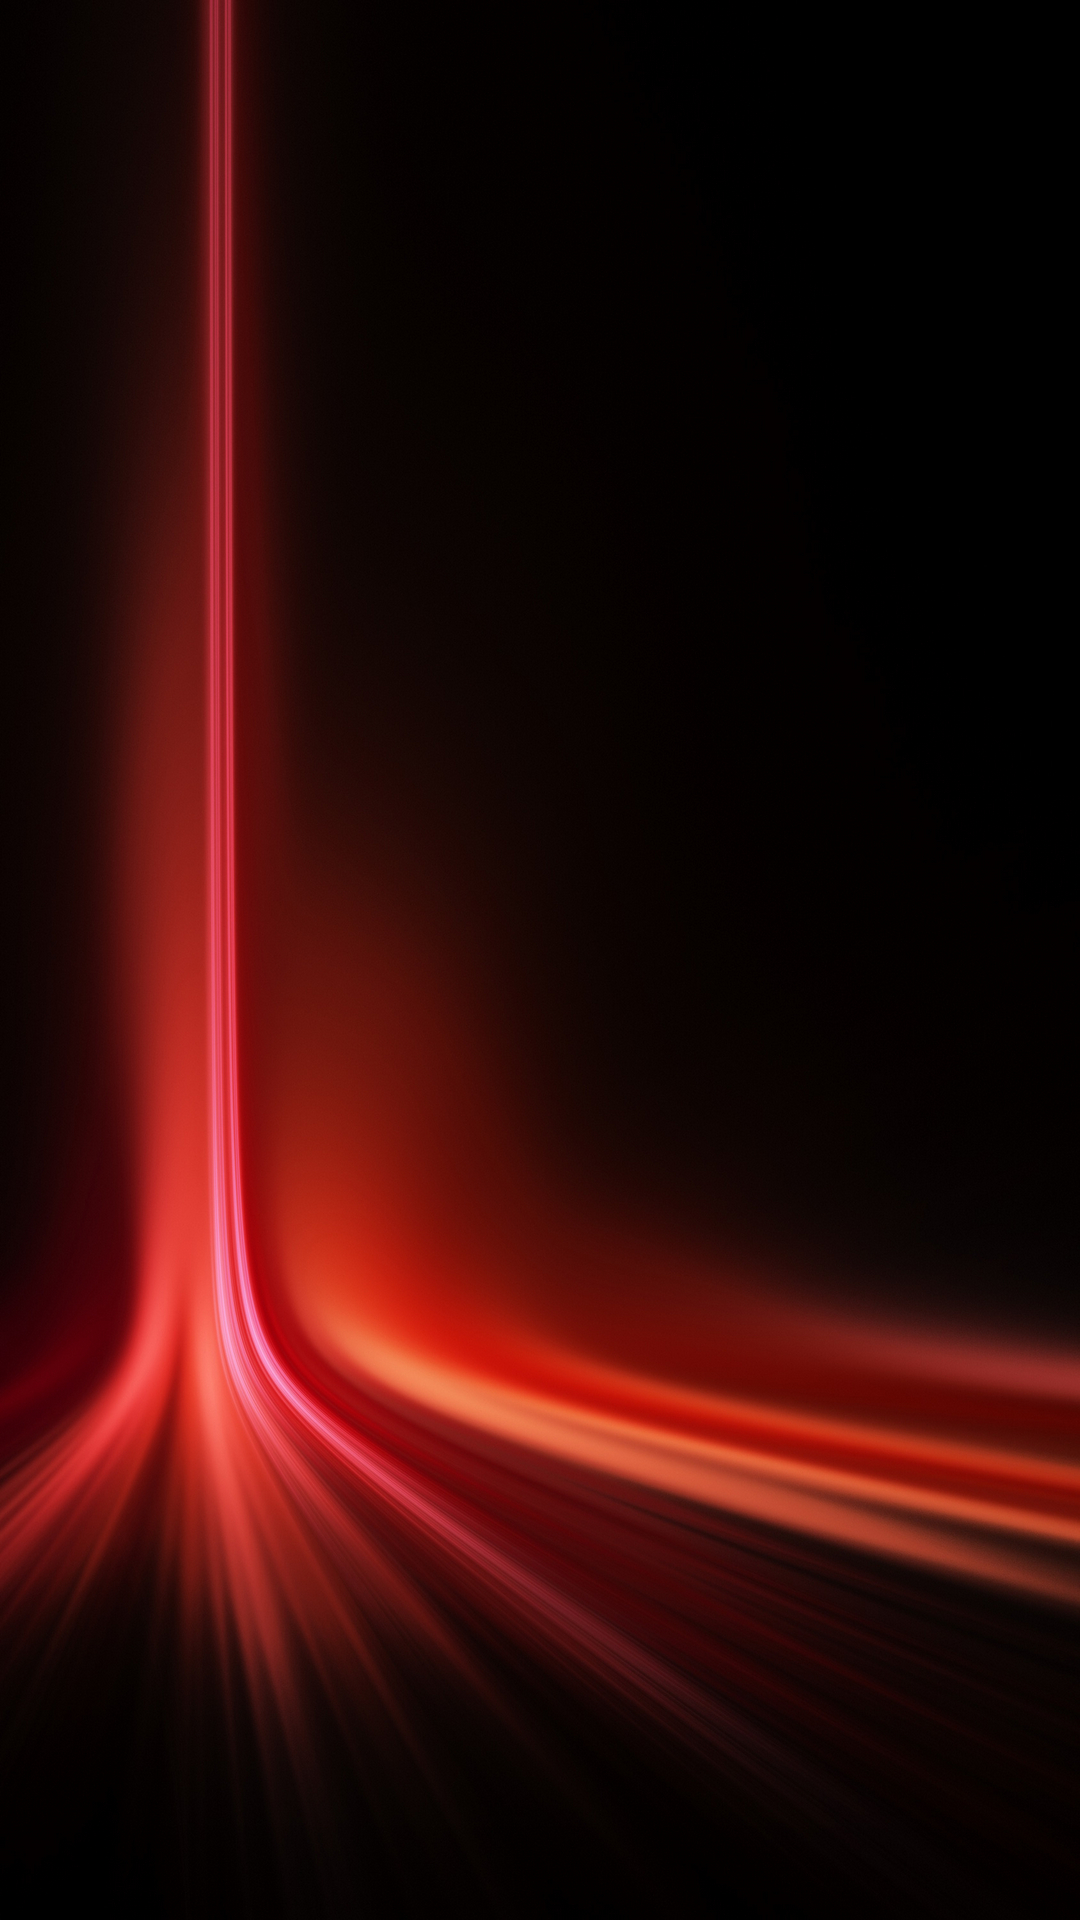 Vertical Red Laser Light Spread Android Wallpaper